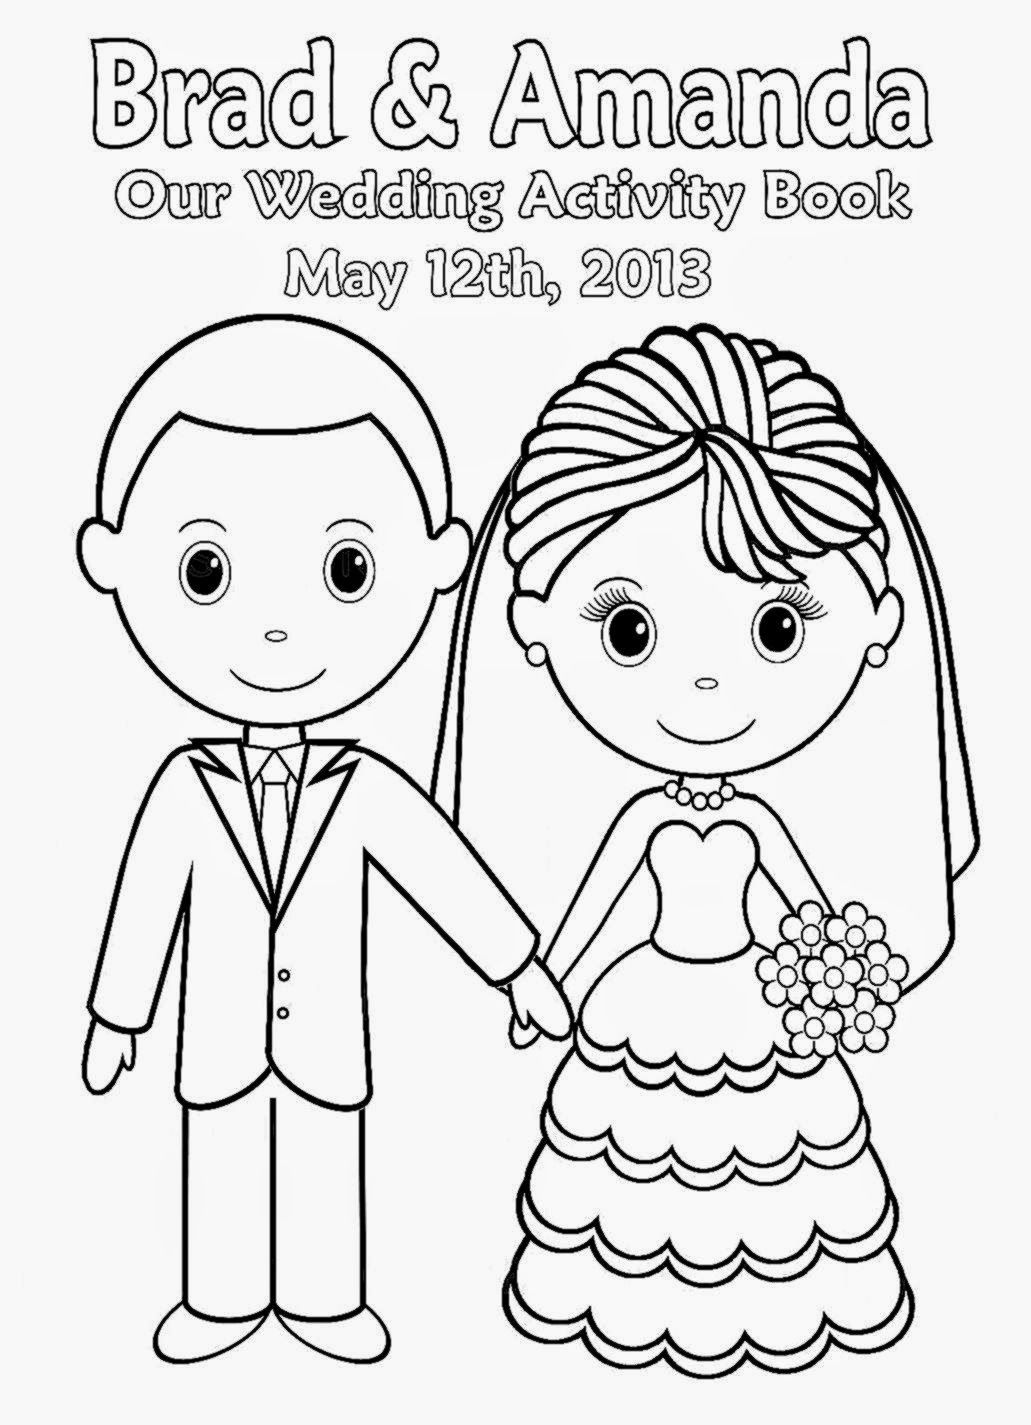 Free Coloring Pages For Wedding Coloring Books - Coloring